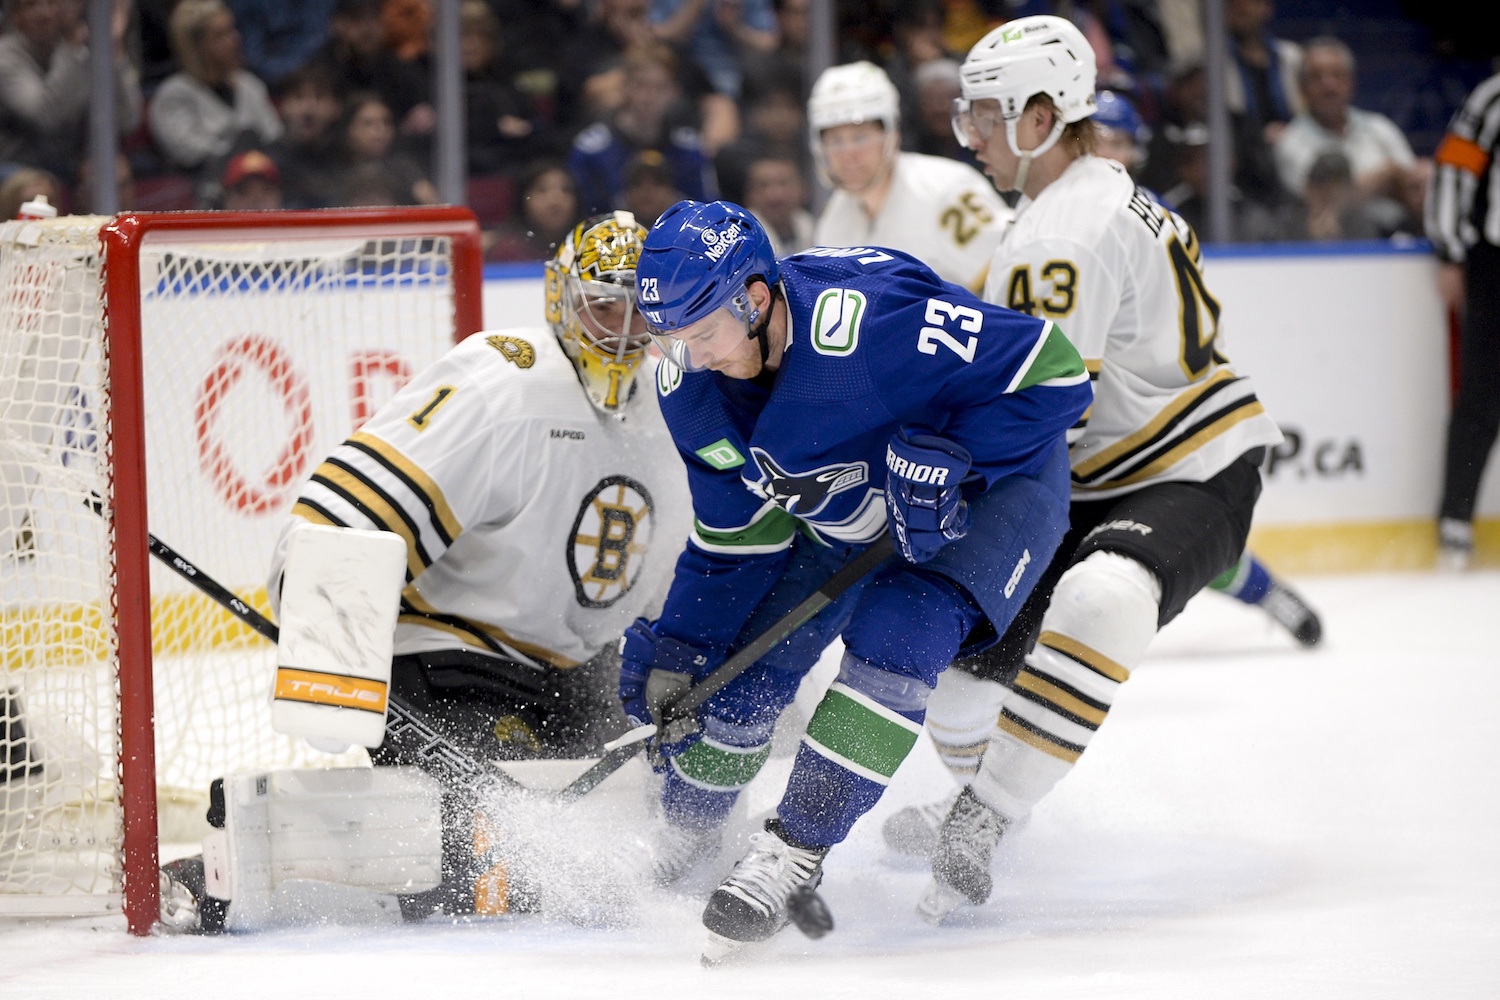 Feb 24, 2024; Vancouver, British Columbia, CAN;  Vancouver Canucks forward Elias Lindholm (23) tries to tip the puck defended by Boston Bruins goaltender Jeremy Swayman (1) and forward Danton Heinen (43)  during the third period at Rogers Arena. Mandatory Credit: Anne-Marie Sorvin-USA TODAY Sports